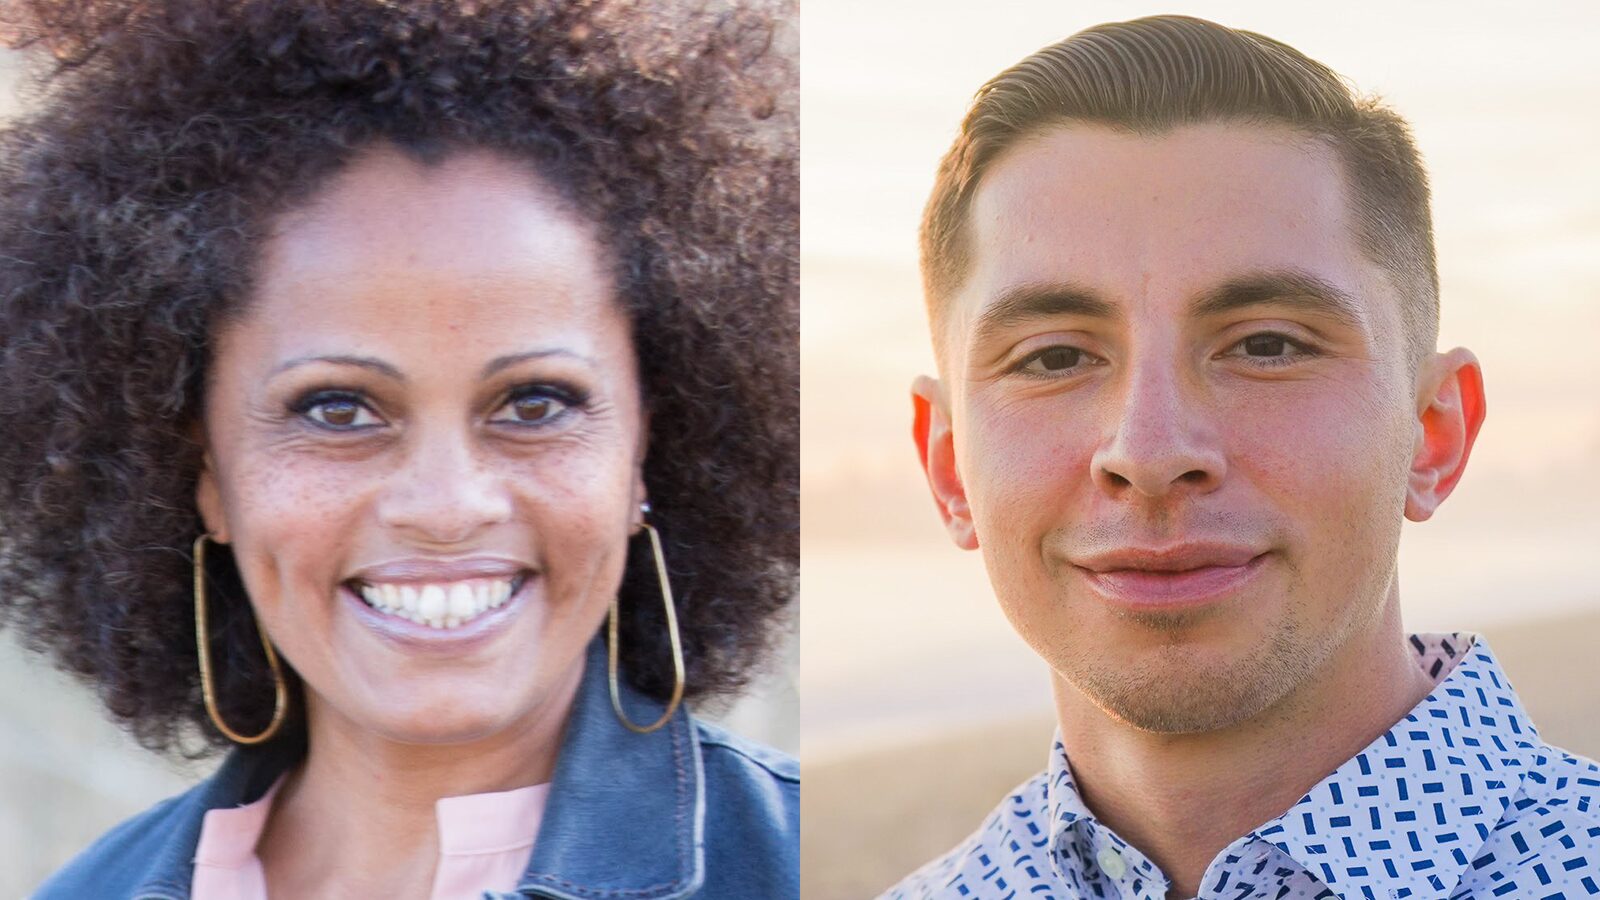 Side-by-side photos of Sonja Brunner and Hector Marin, candidates for the District 2 Santa Cruz City Council seat.